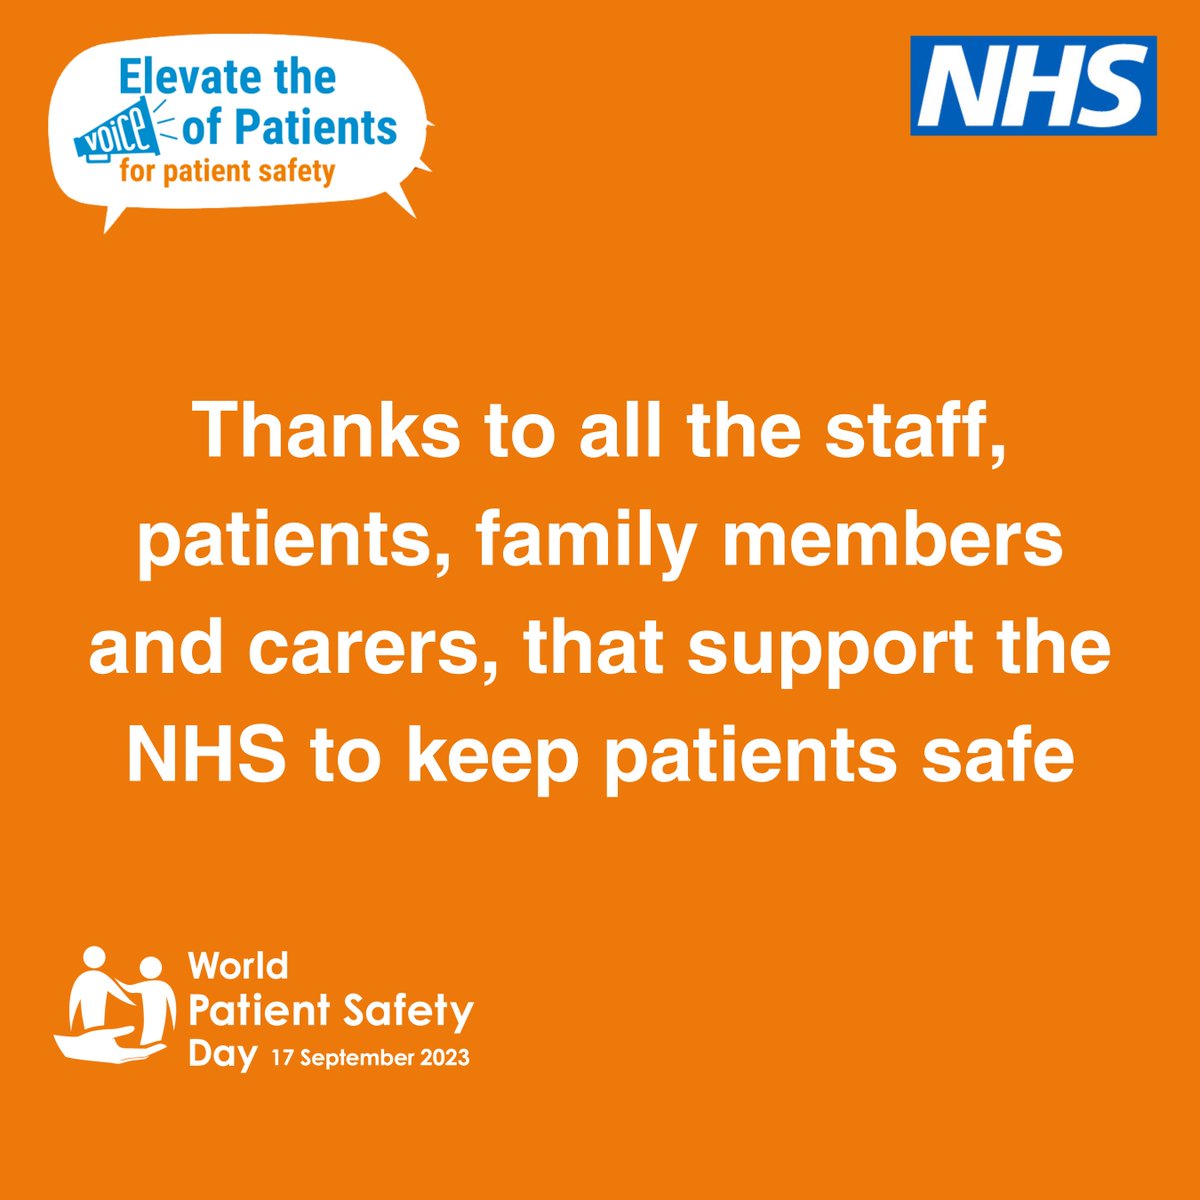 Today's #WorldPatientSafetyDay focuses on the importance of engaging patients for patient safety. The role of patients, their families and carers and others, working with healthcare staff, is vital to making care safer, and a key part of the NHS Patient Safety Strategy.